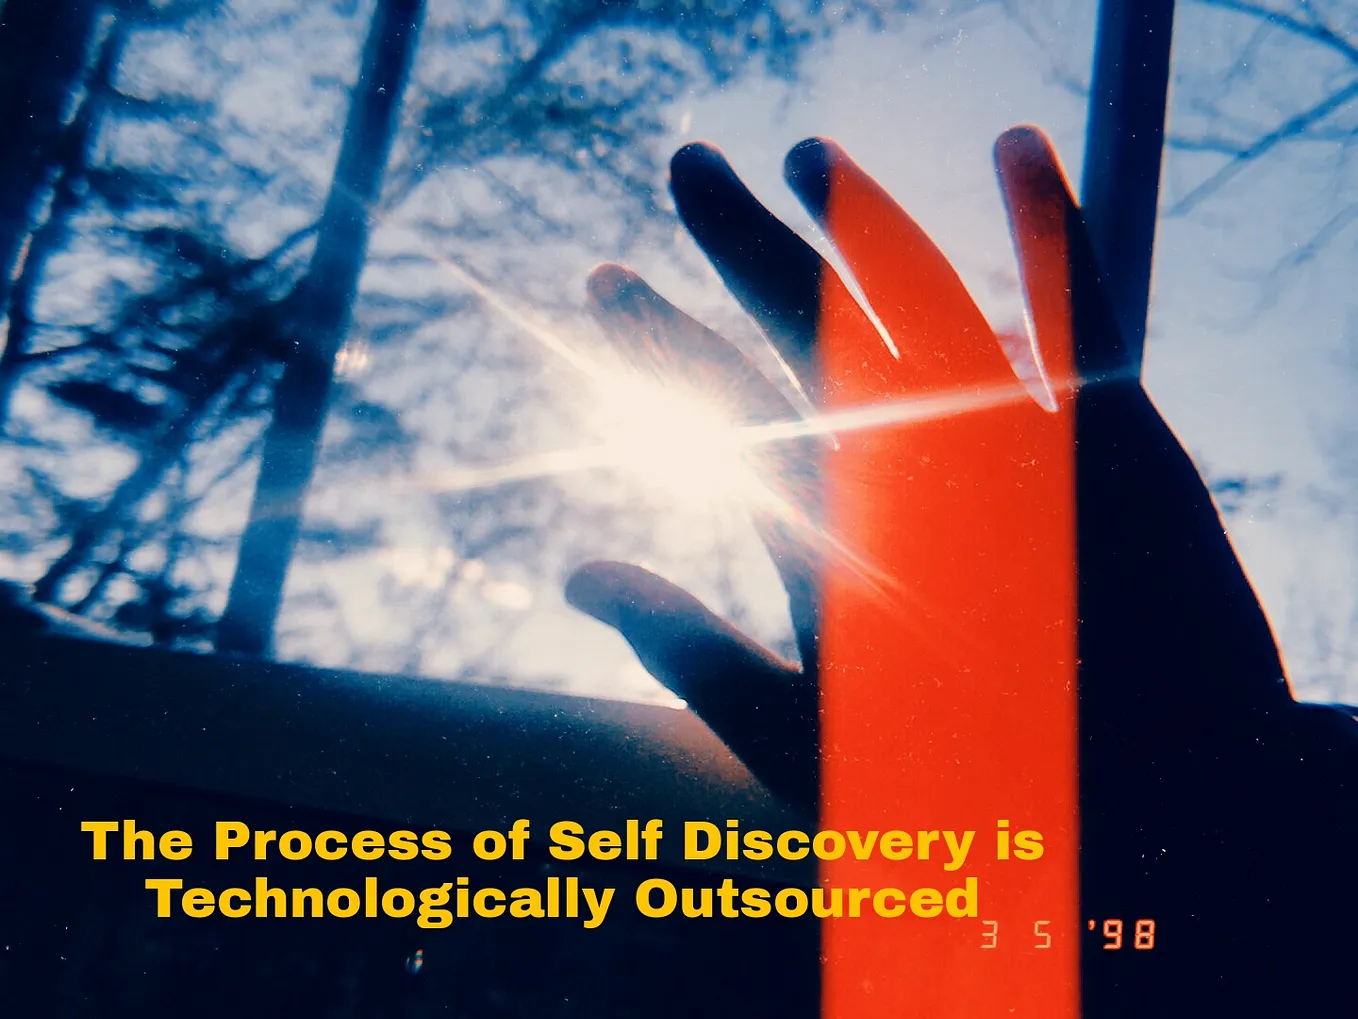 The Process of Self Discovery is technologically outsourced